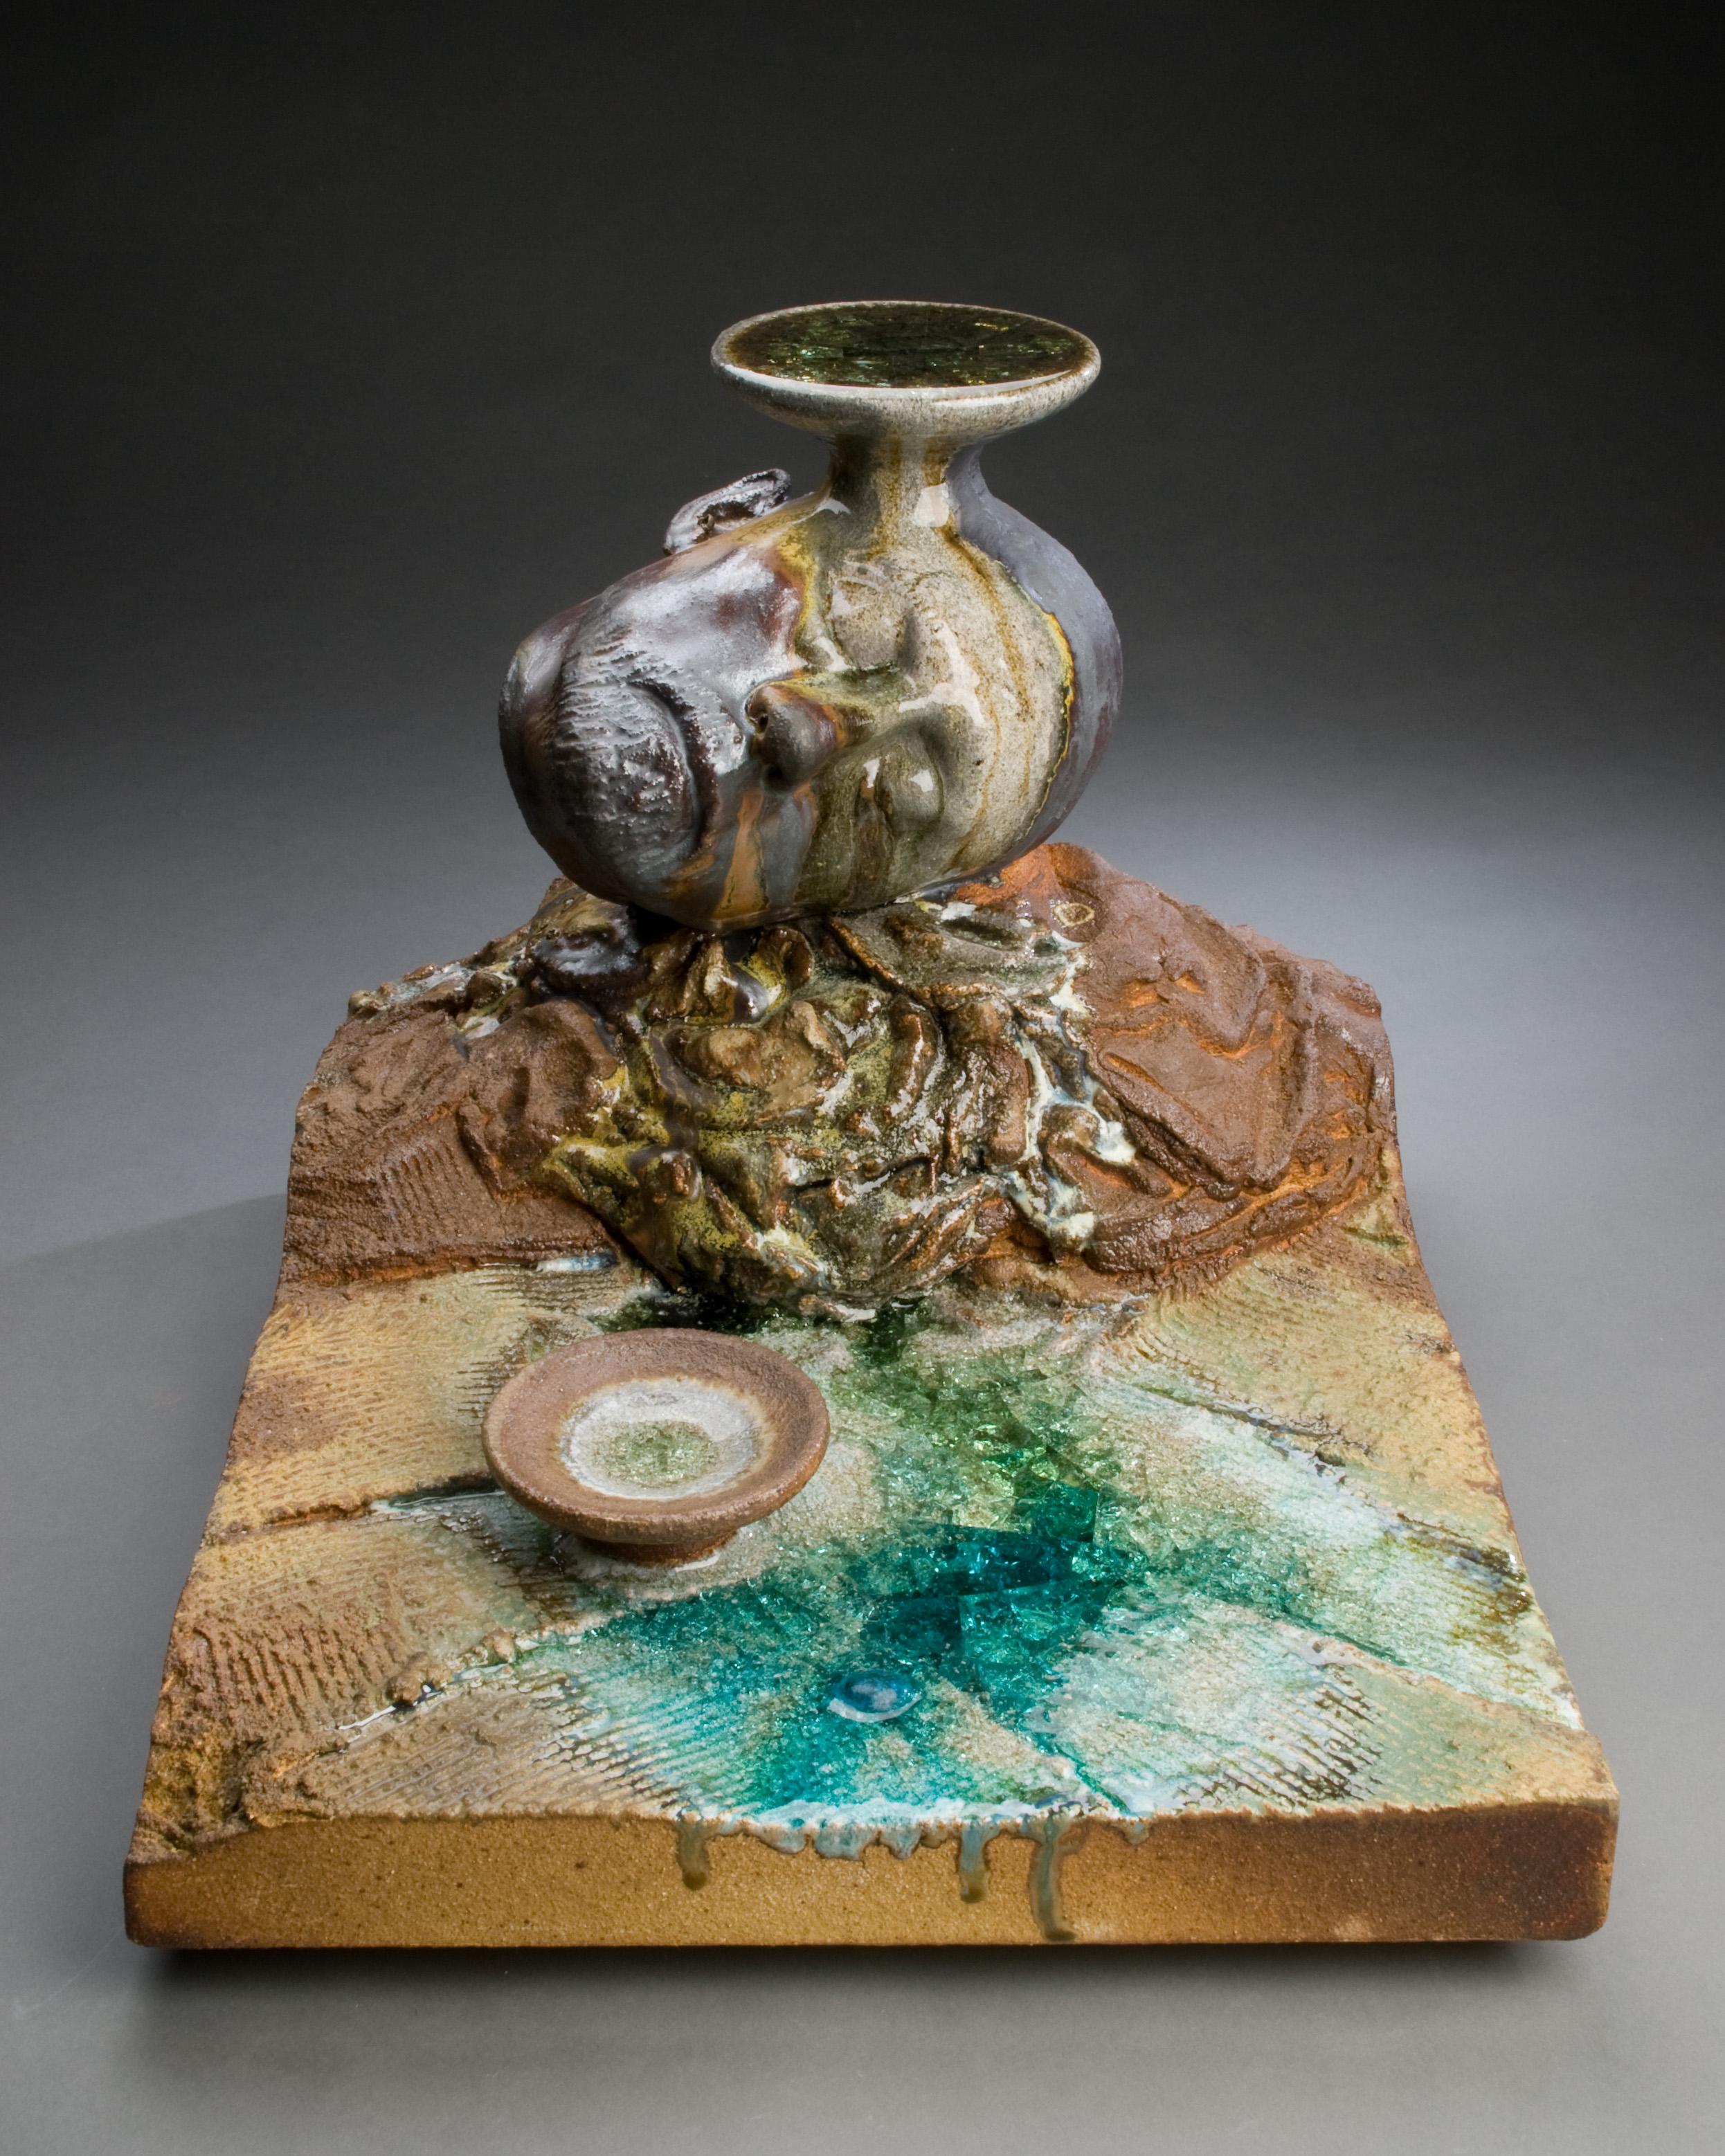 Tony Moore Figurative Sculpture - Ceramic wood-fired sculpture: 'Earth And Sky '